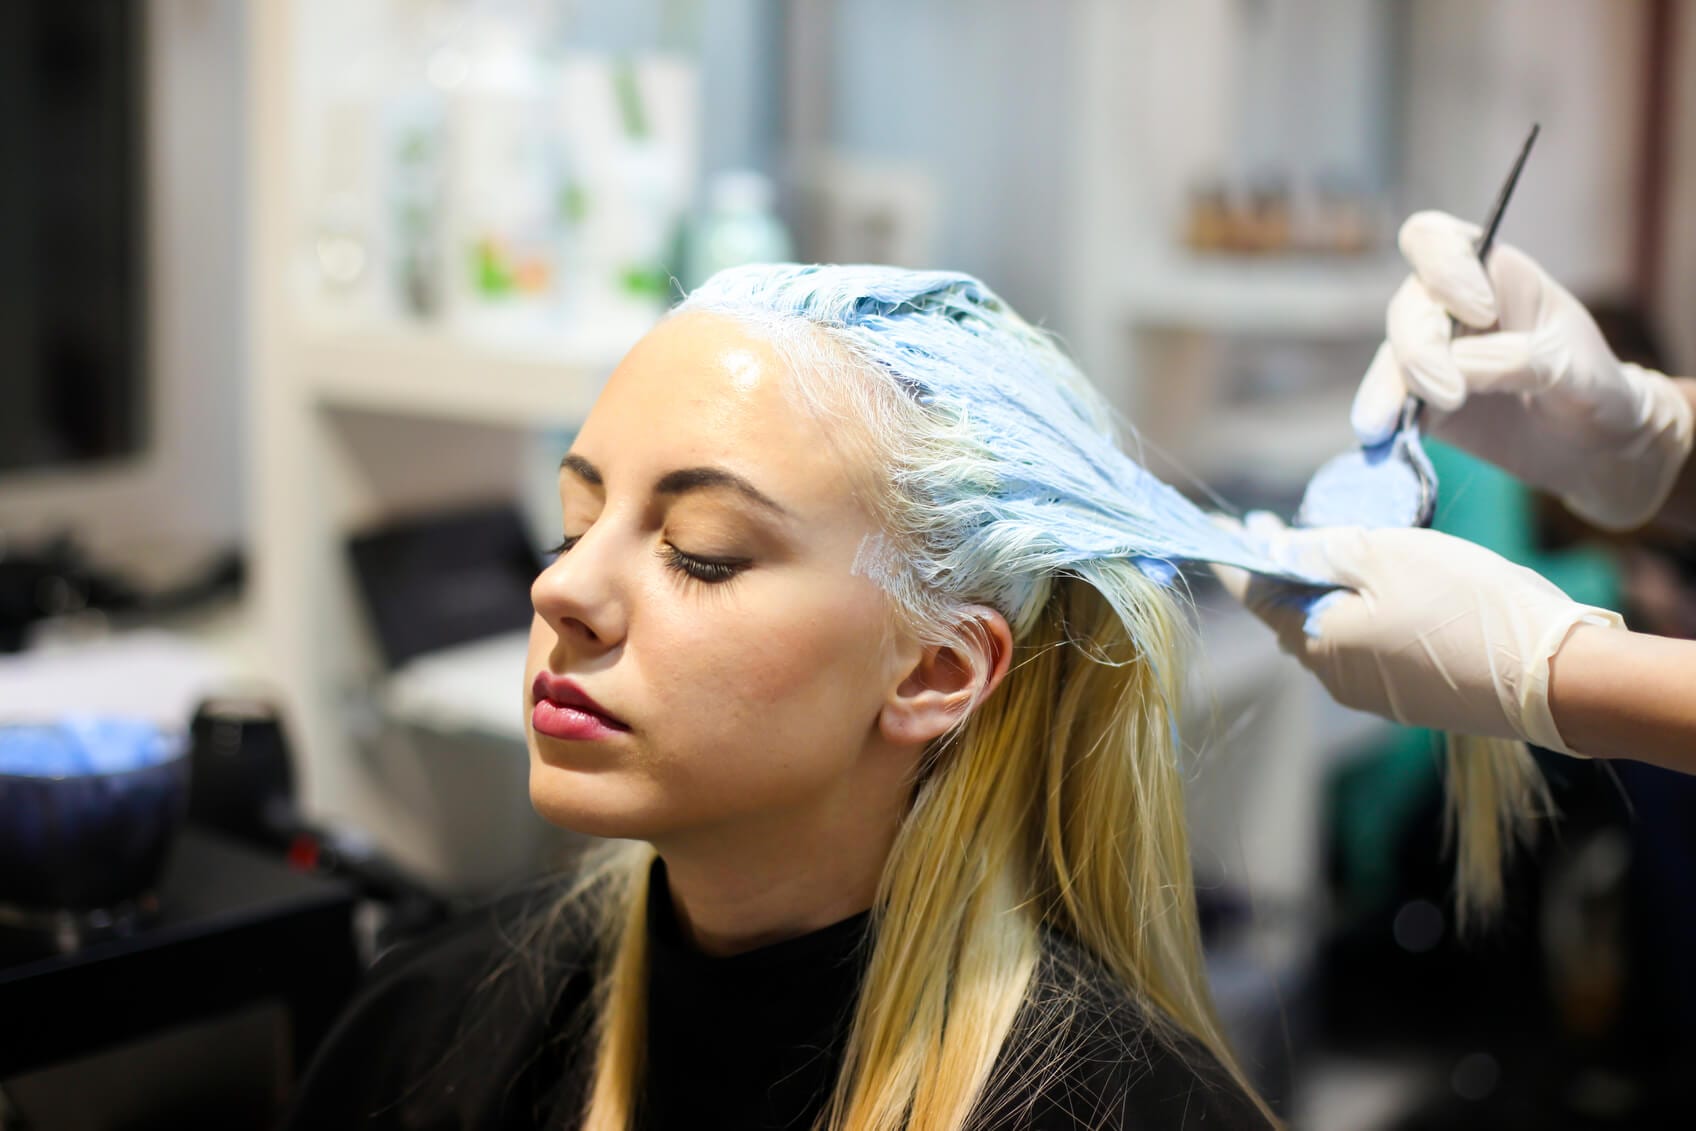 A Beautician Re-Dye Hairs of a Girl